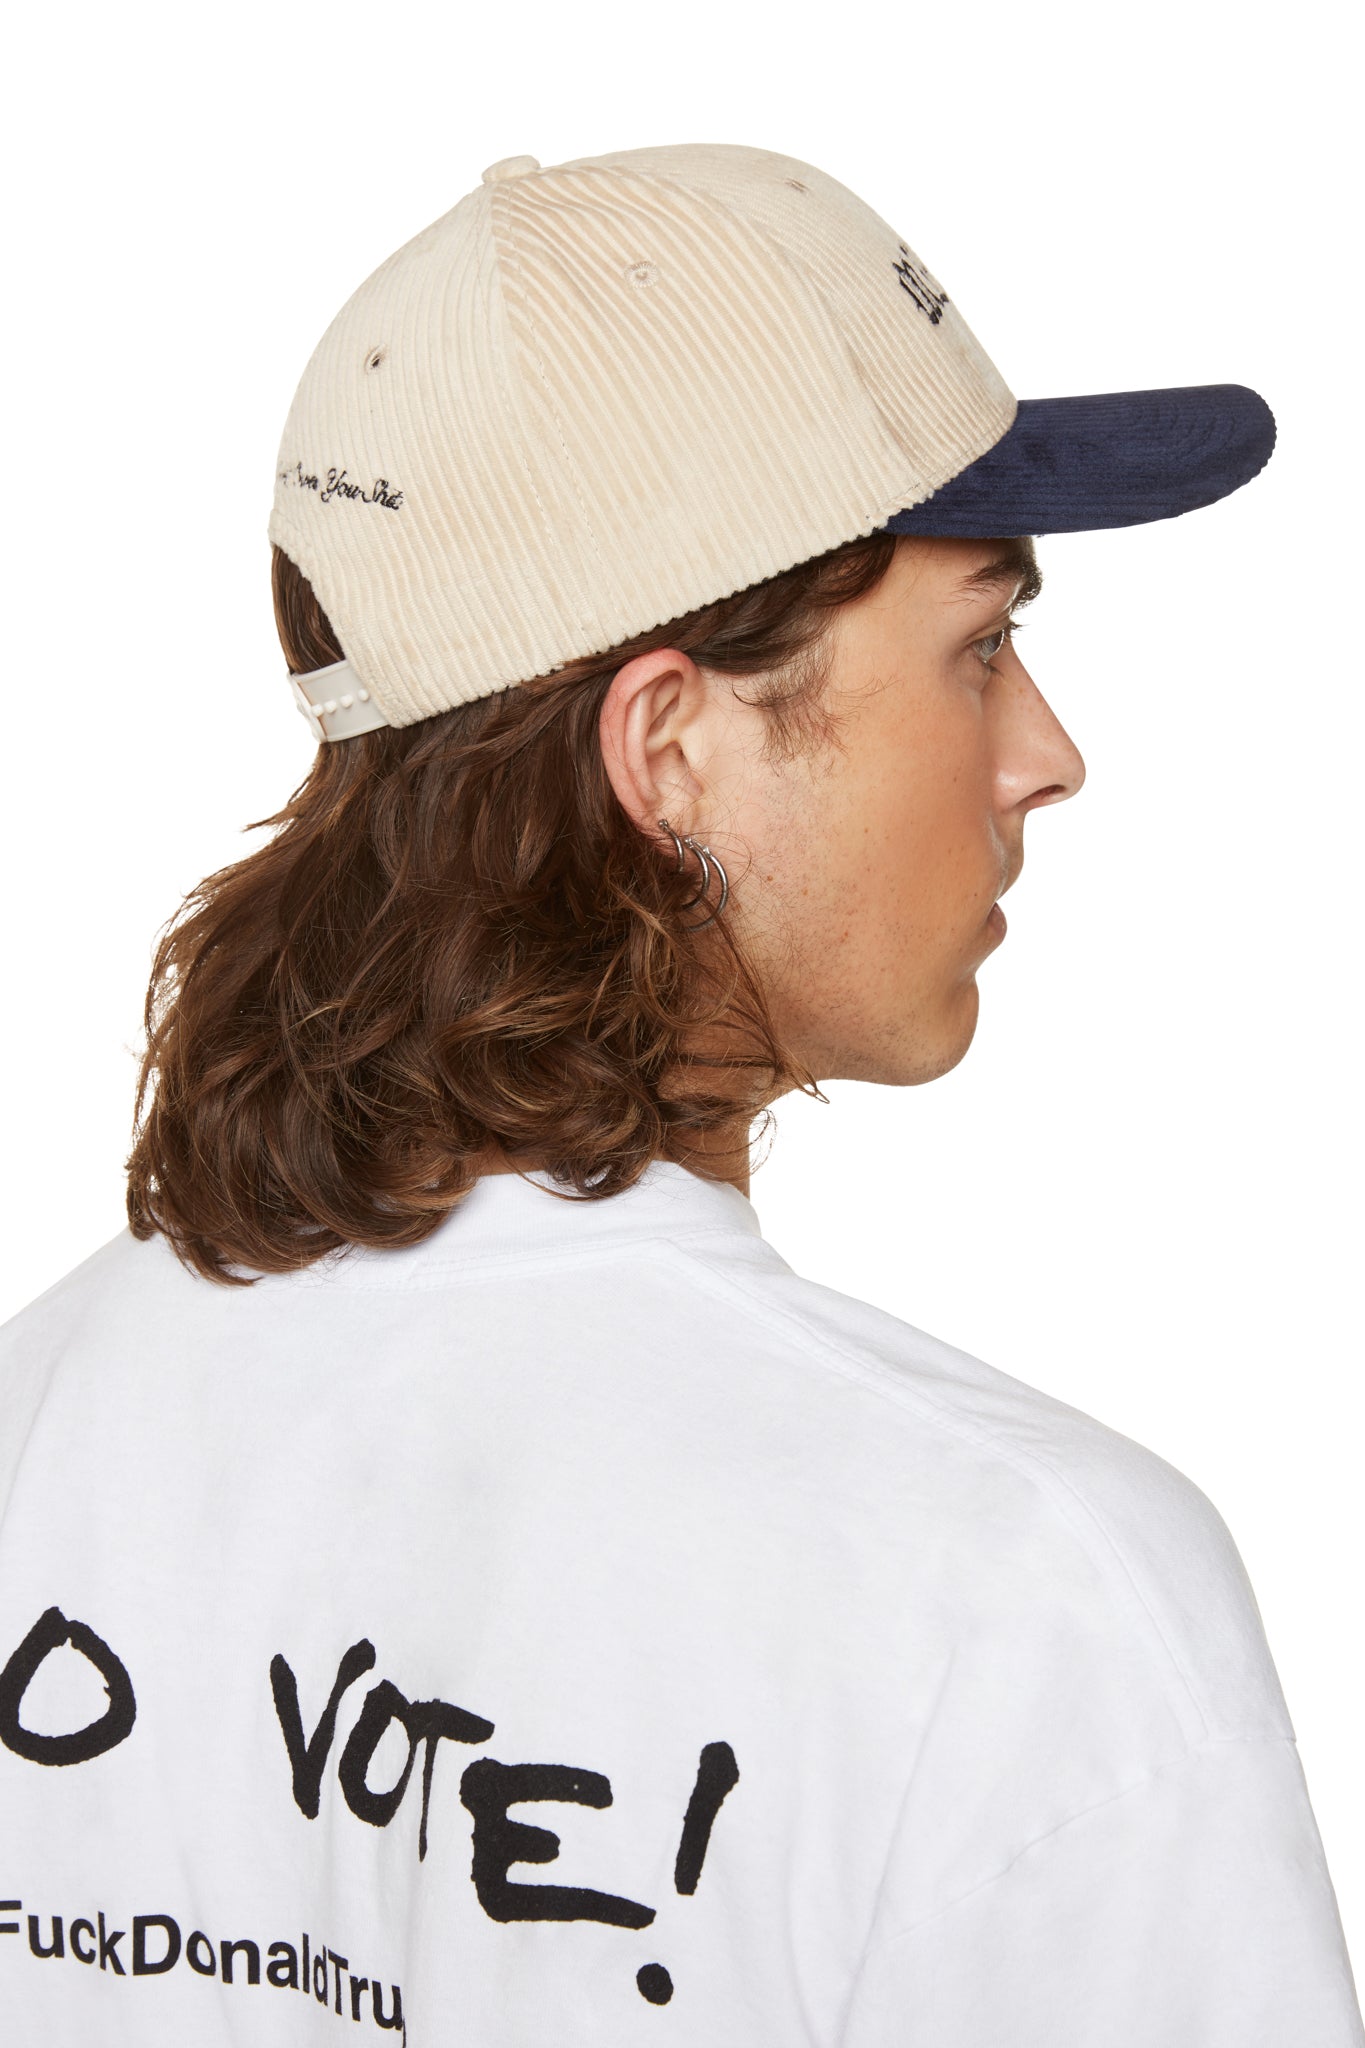 NO ONE IN THE WORLD OWES YOU SHIT CORDUROY LOGO CAP